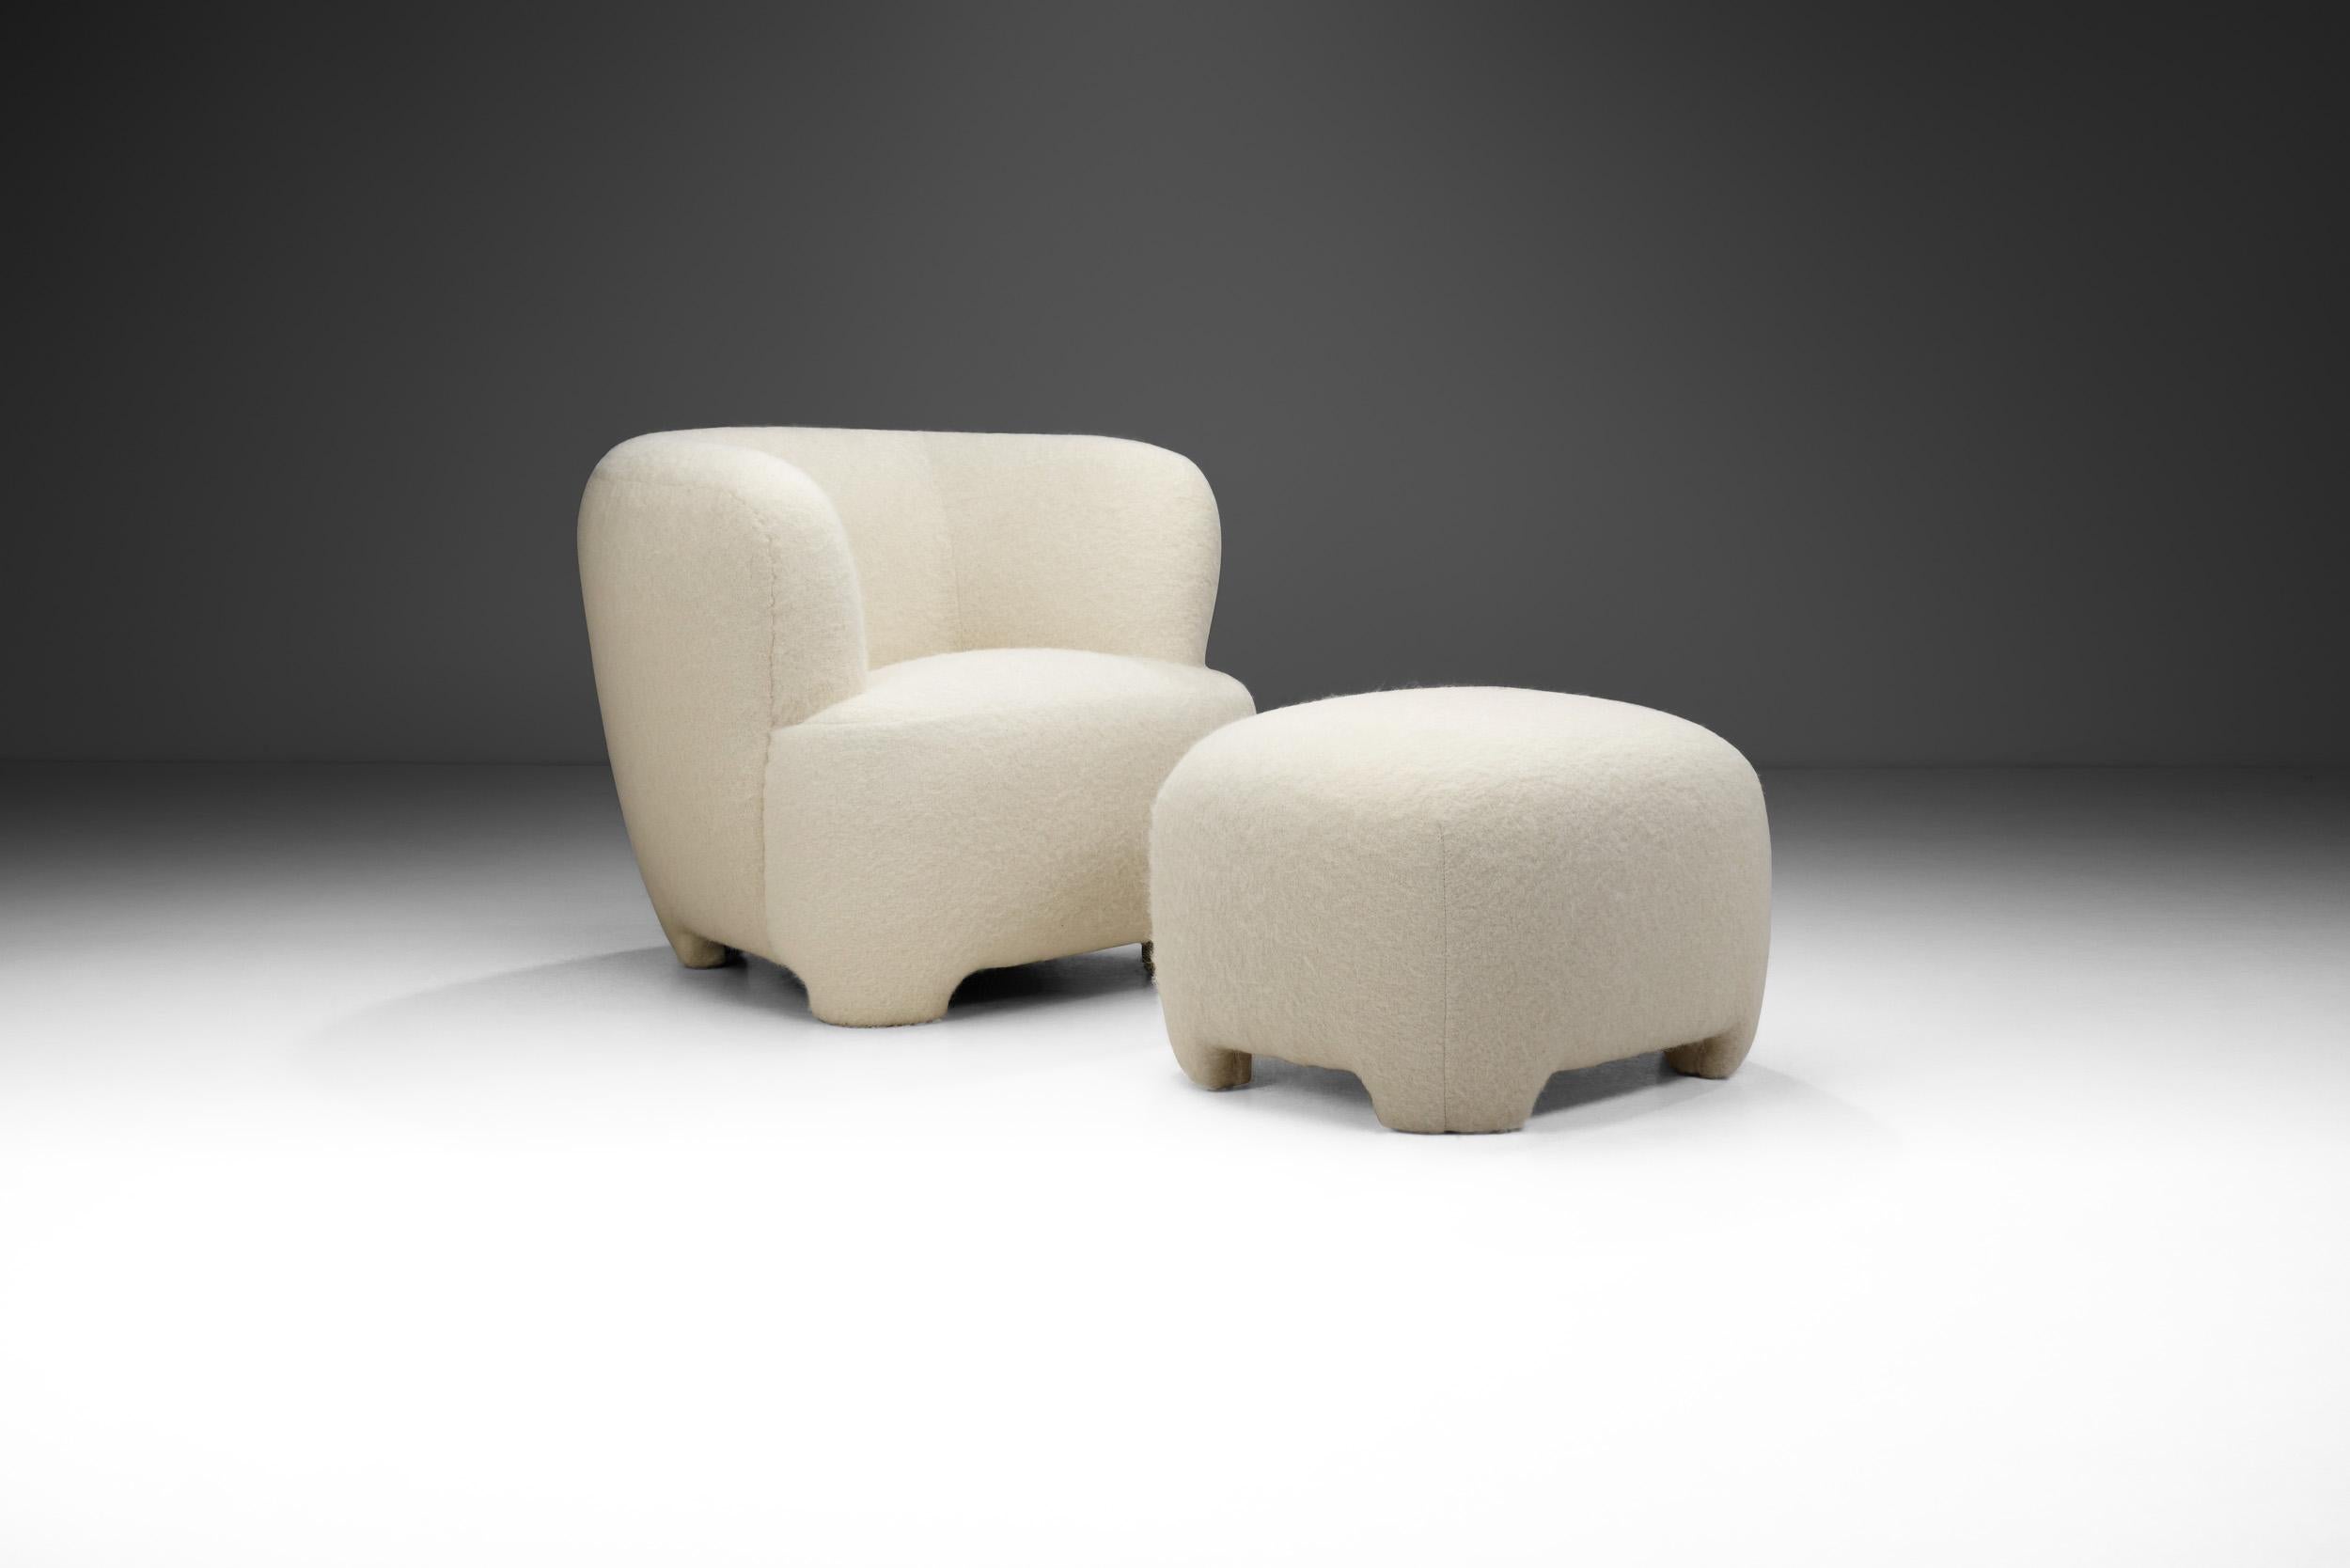 This pair of lounge chair and ottoman is an elegant and comfortable evidence of the mastery and artistry of the European cabinetmakers who defined mid-20th century modern seating. This duo is of the highest quality, both in terms of visual quality,